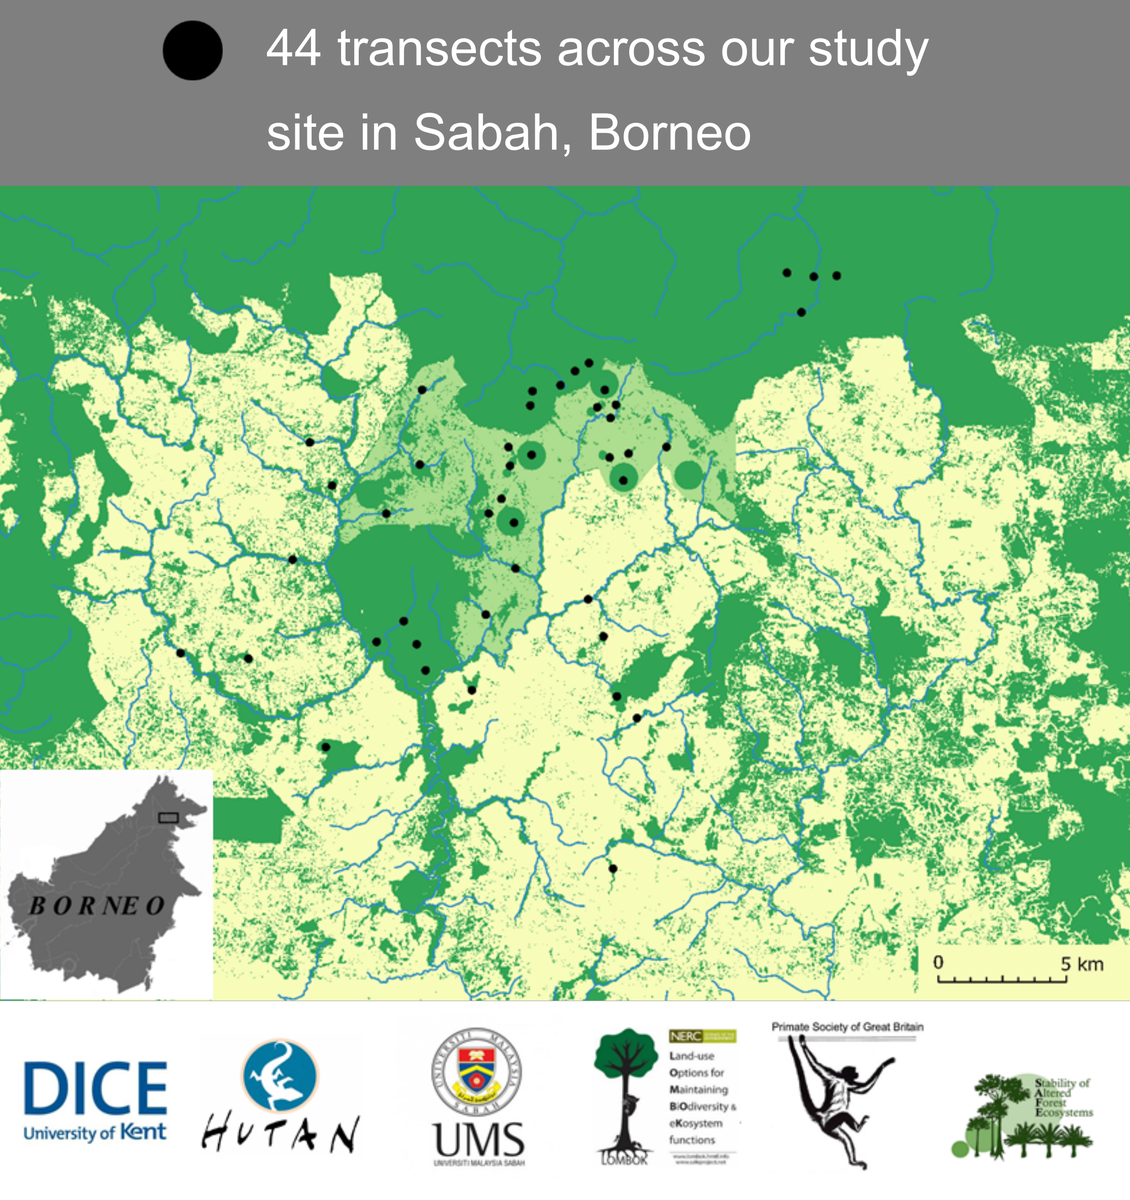 2/6 I surveyed @SAFE_Project in Sabah & found nests on all transects, including forest patches in  where orangutans persist but at lower densities: 0.82/km2,~3x lower than in continuous forest.  #DICECON20  #SpsMon2Check out our paper  @AmJournalPrimat:  http://doi.org/10.1002/ajp.23030